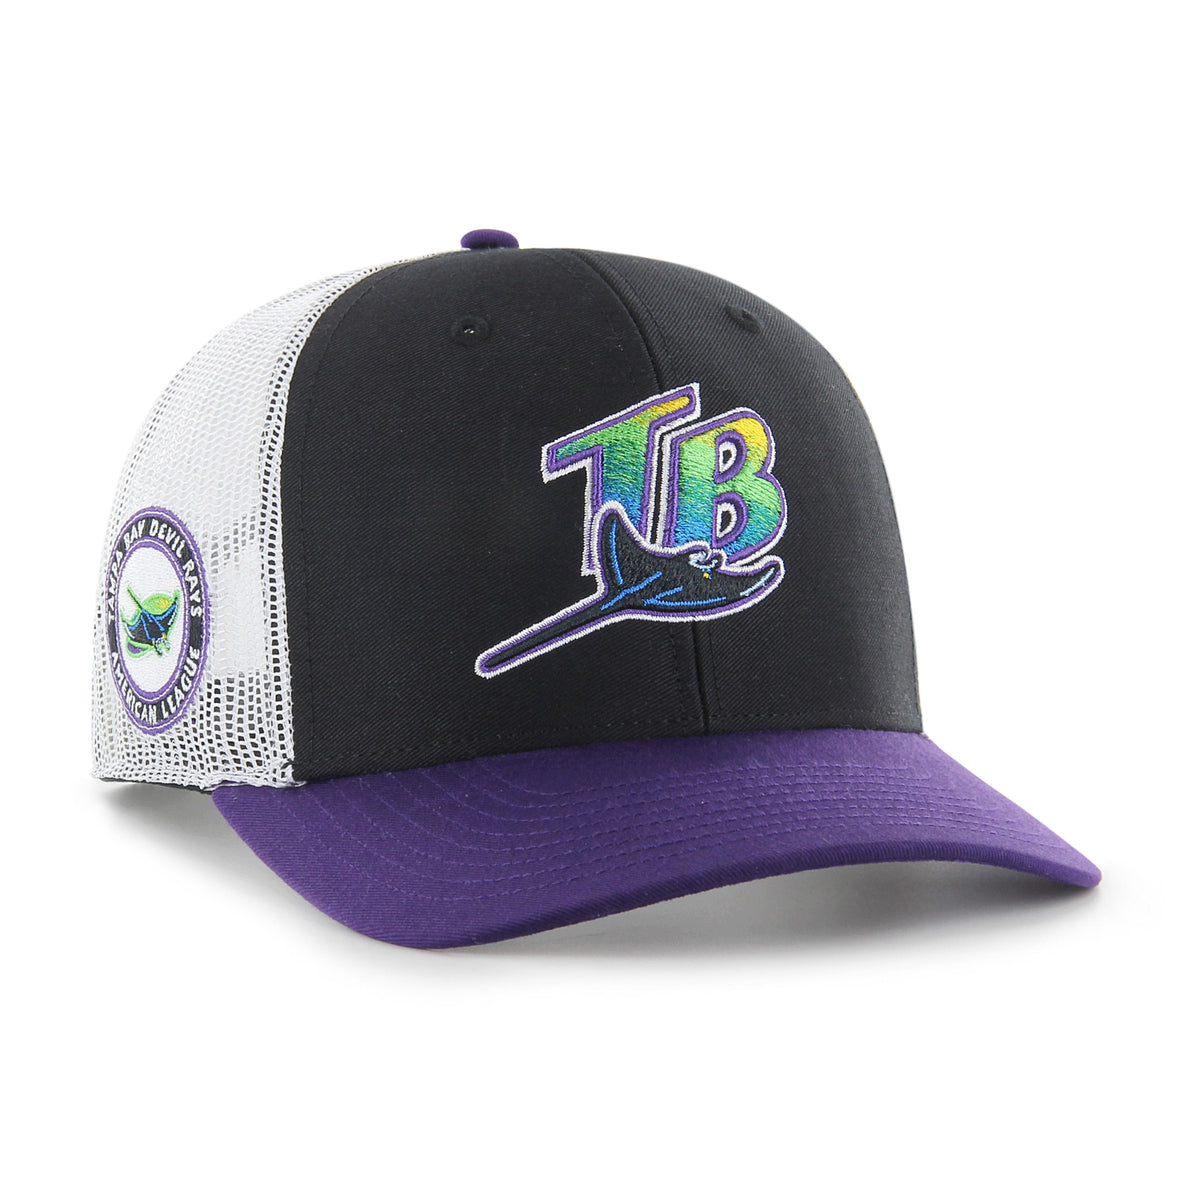 TAMPA BAY RAYS COOPERSTOWN SIDE NOTE '47 TRUCKER